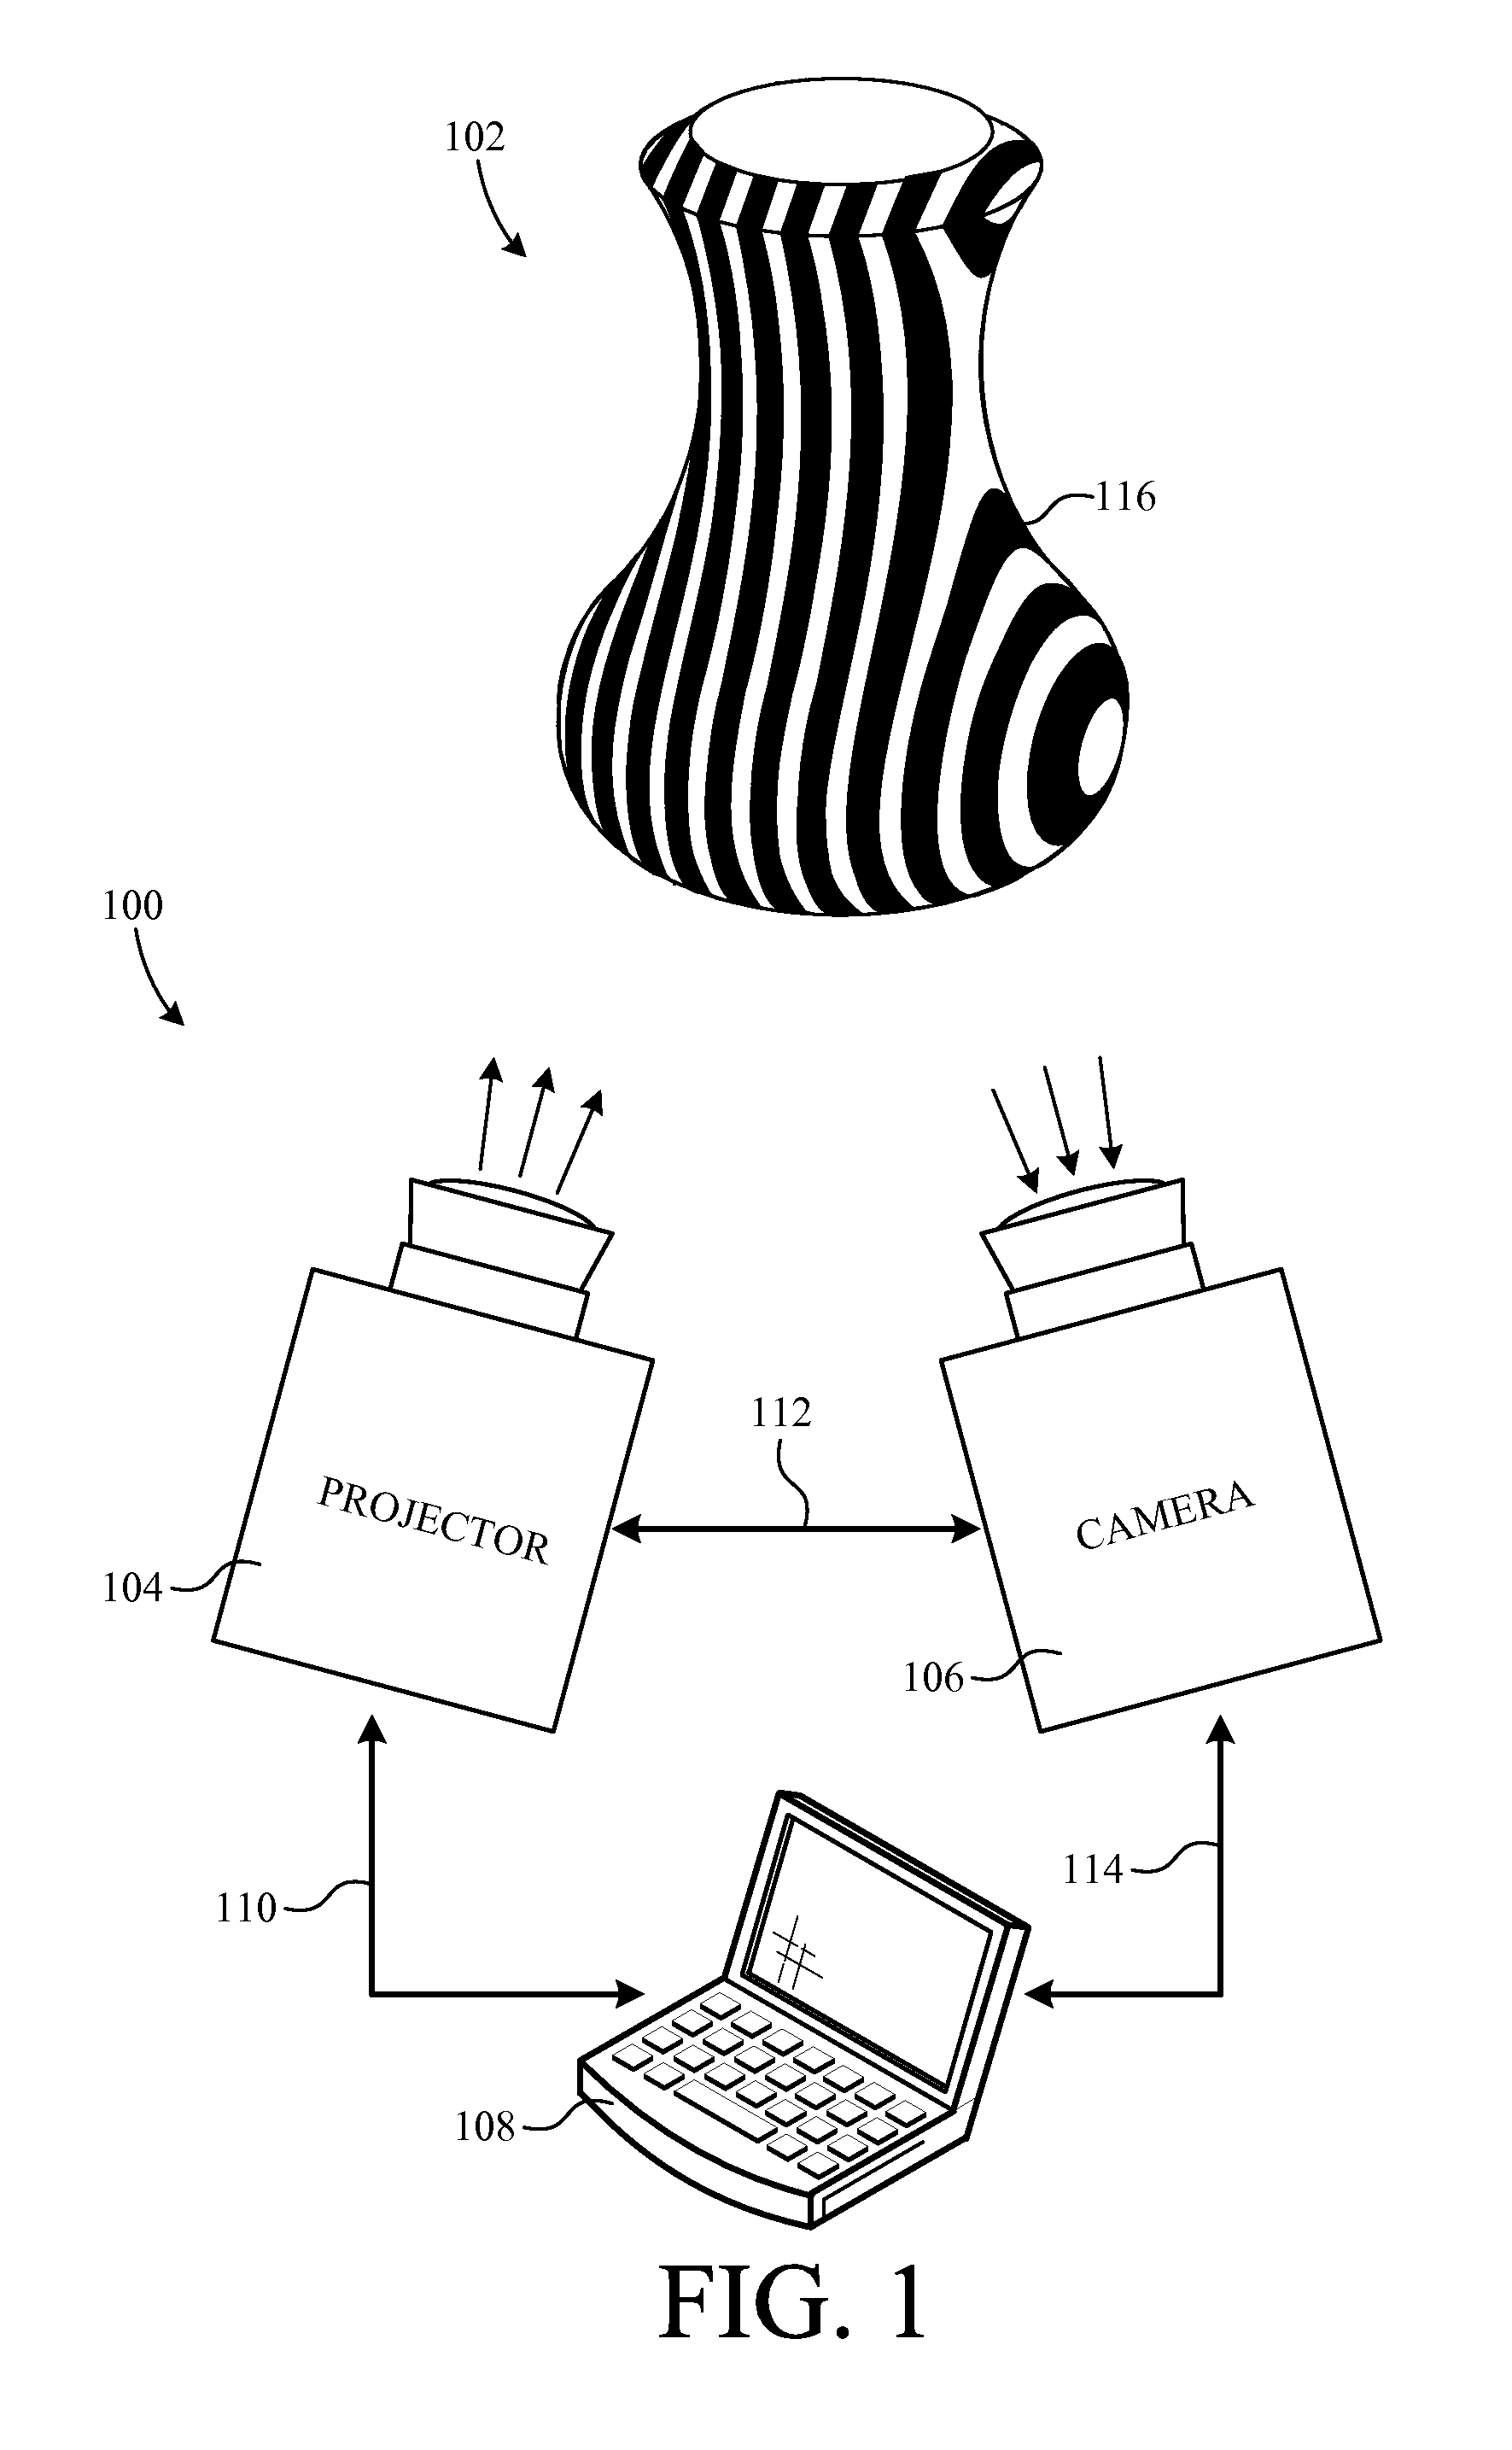 Application specific, dual mode projection system and method